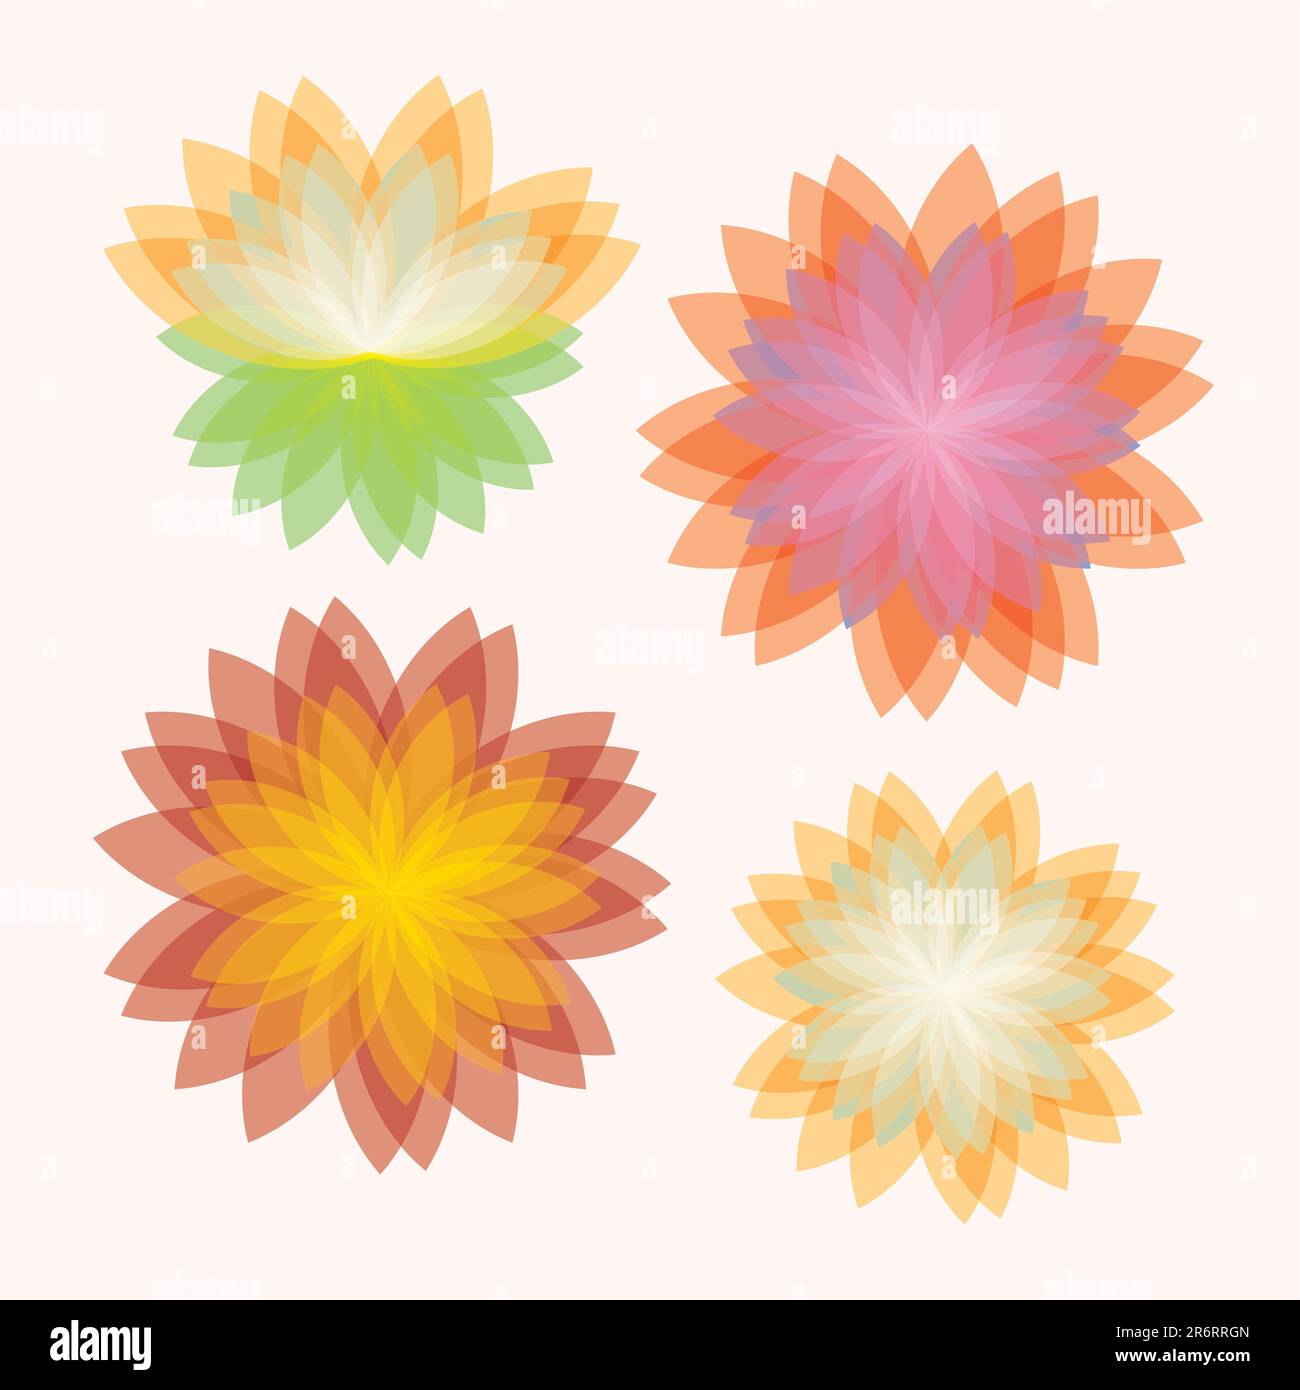 vector ornament In flower style Stock Vector